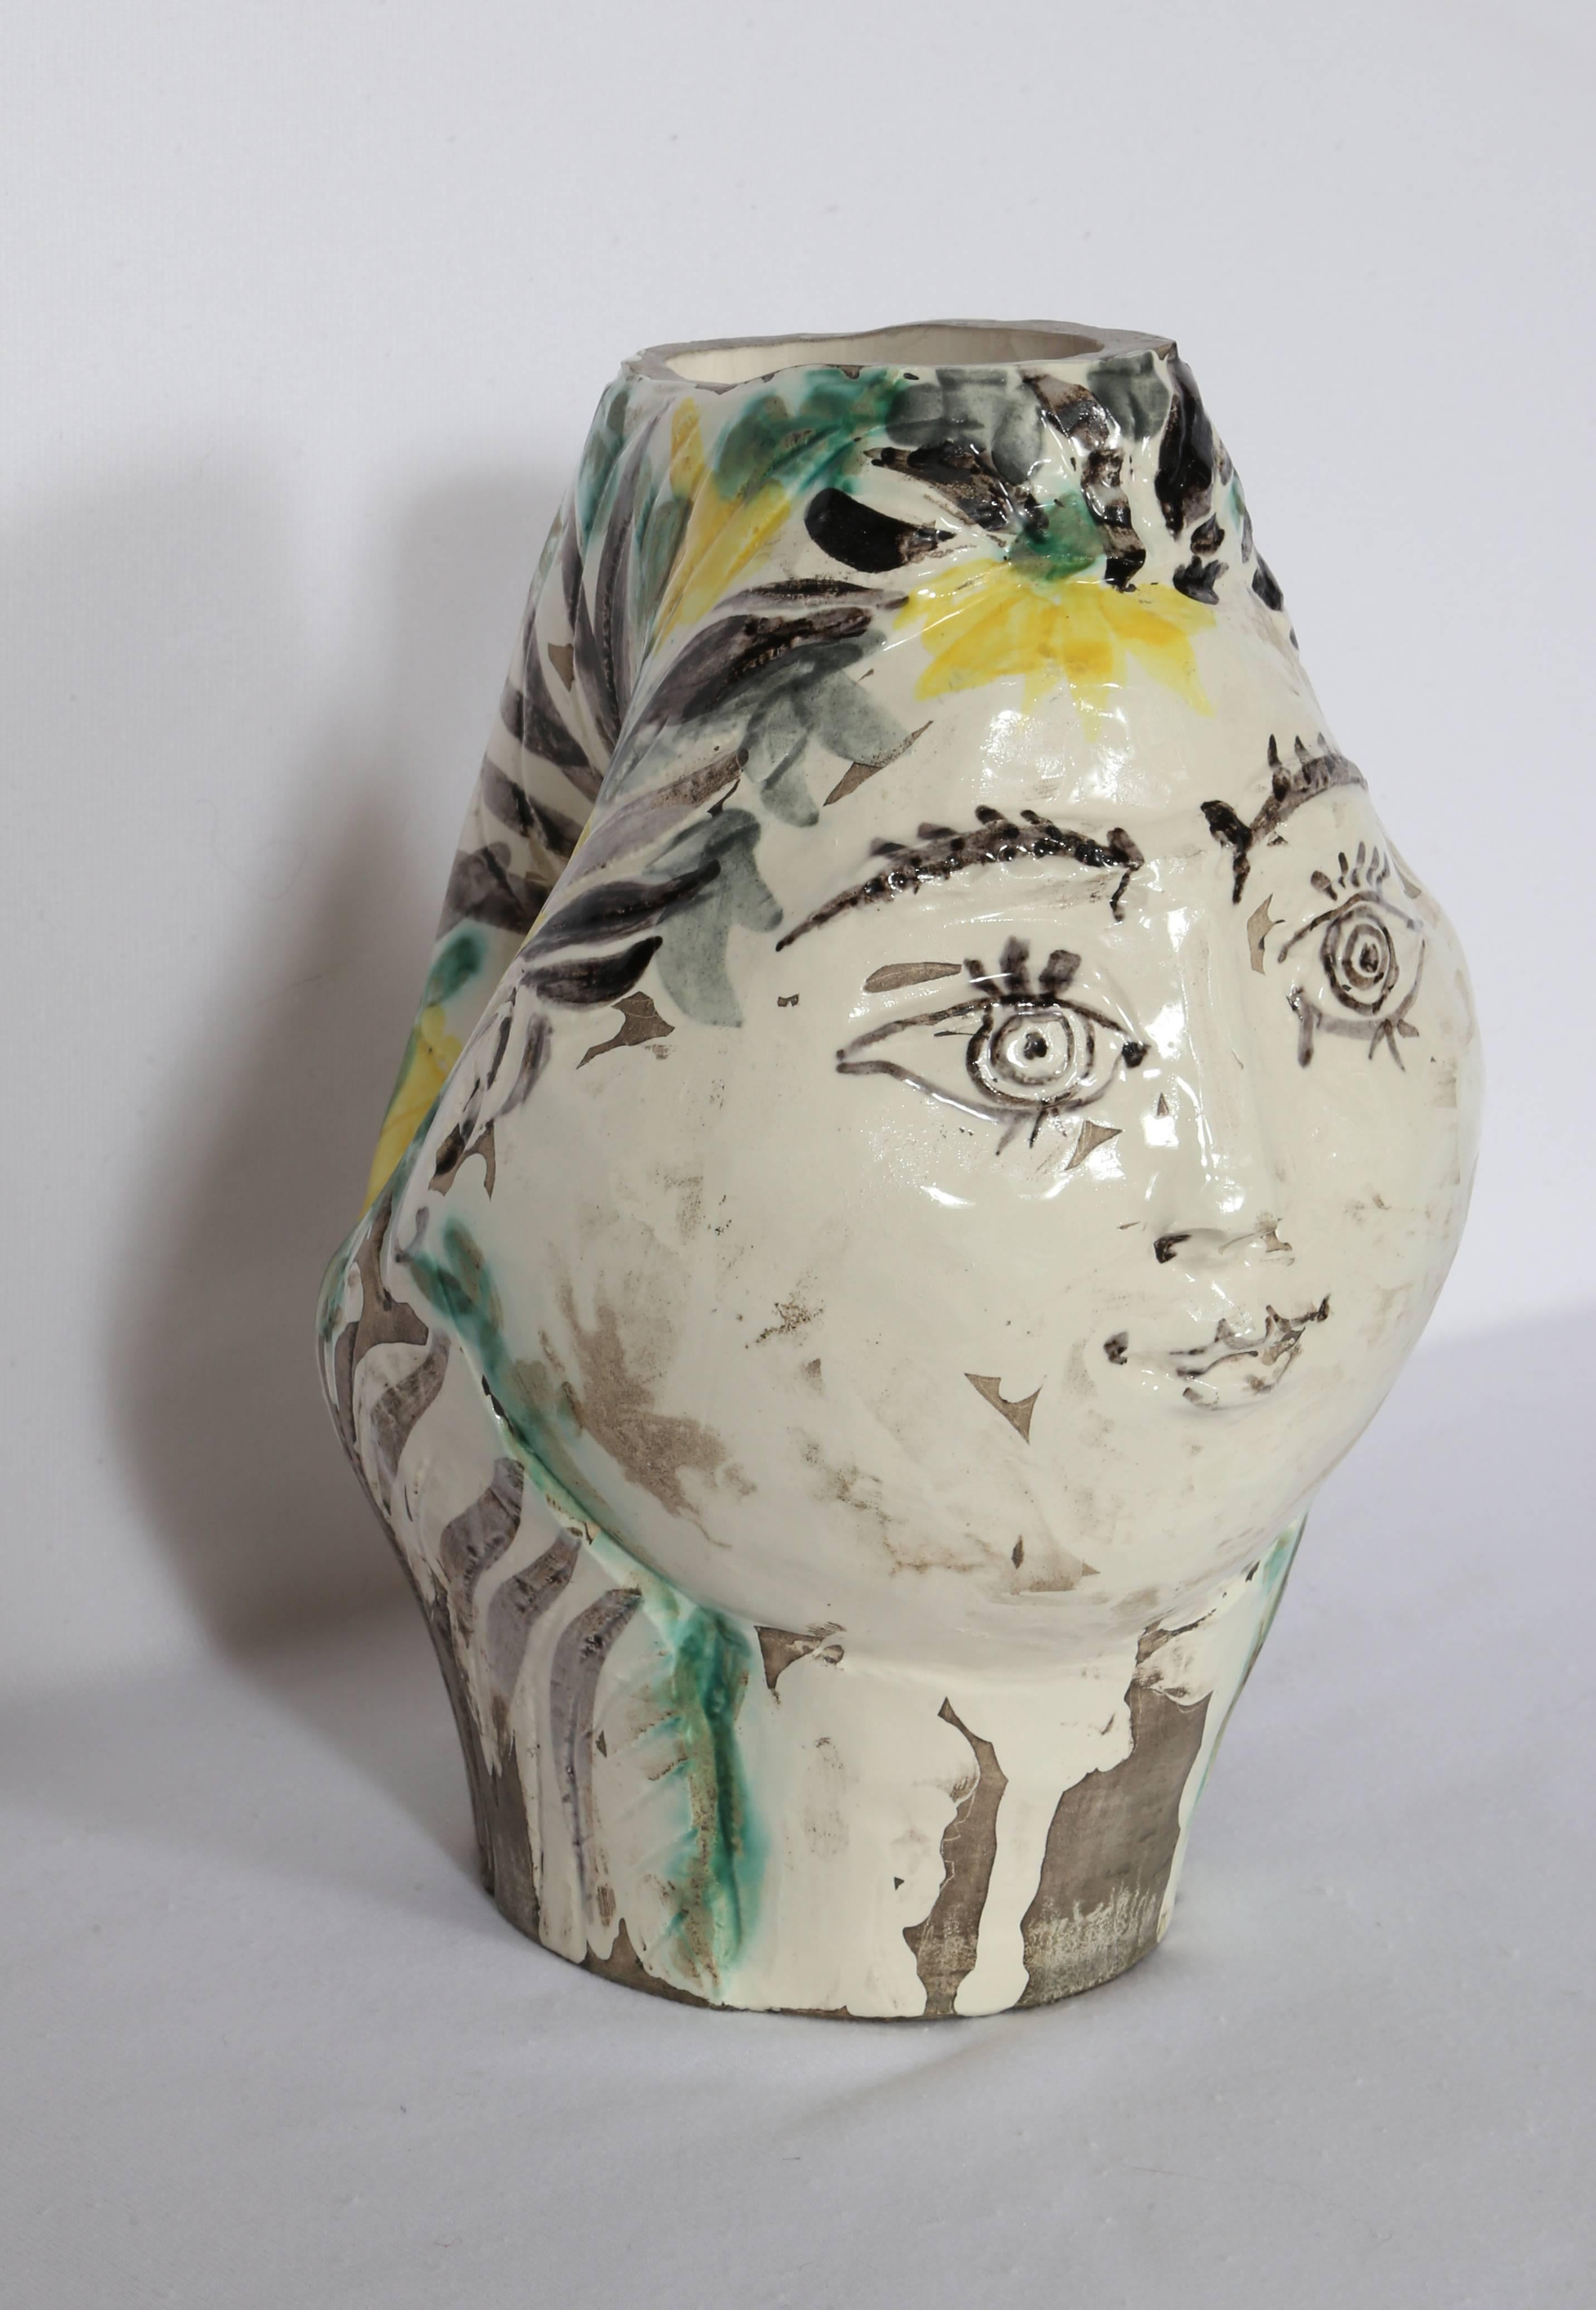 Woman's Head, Decorated with Flowers, Ceramic by Pablo Picasso 1954 For Sale 1